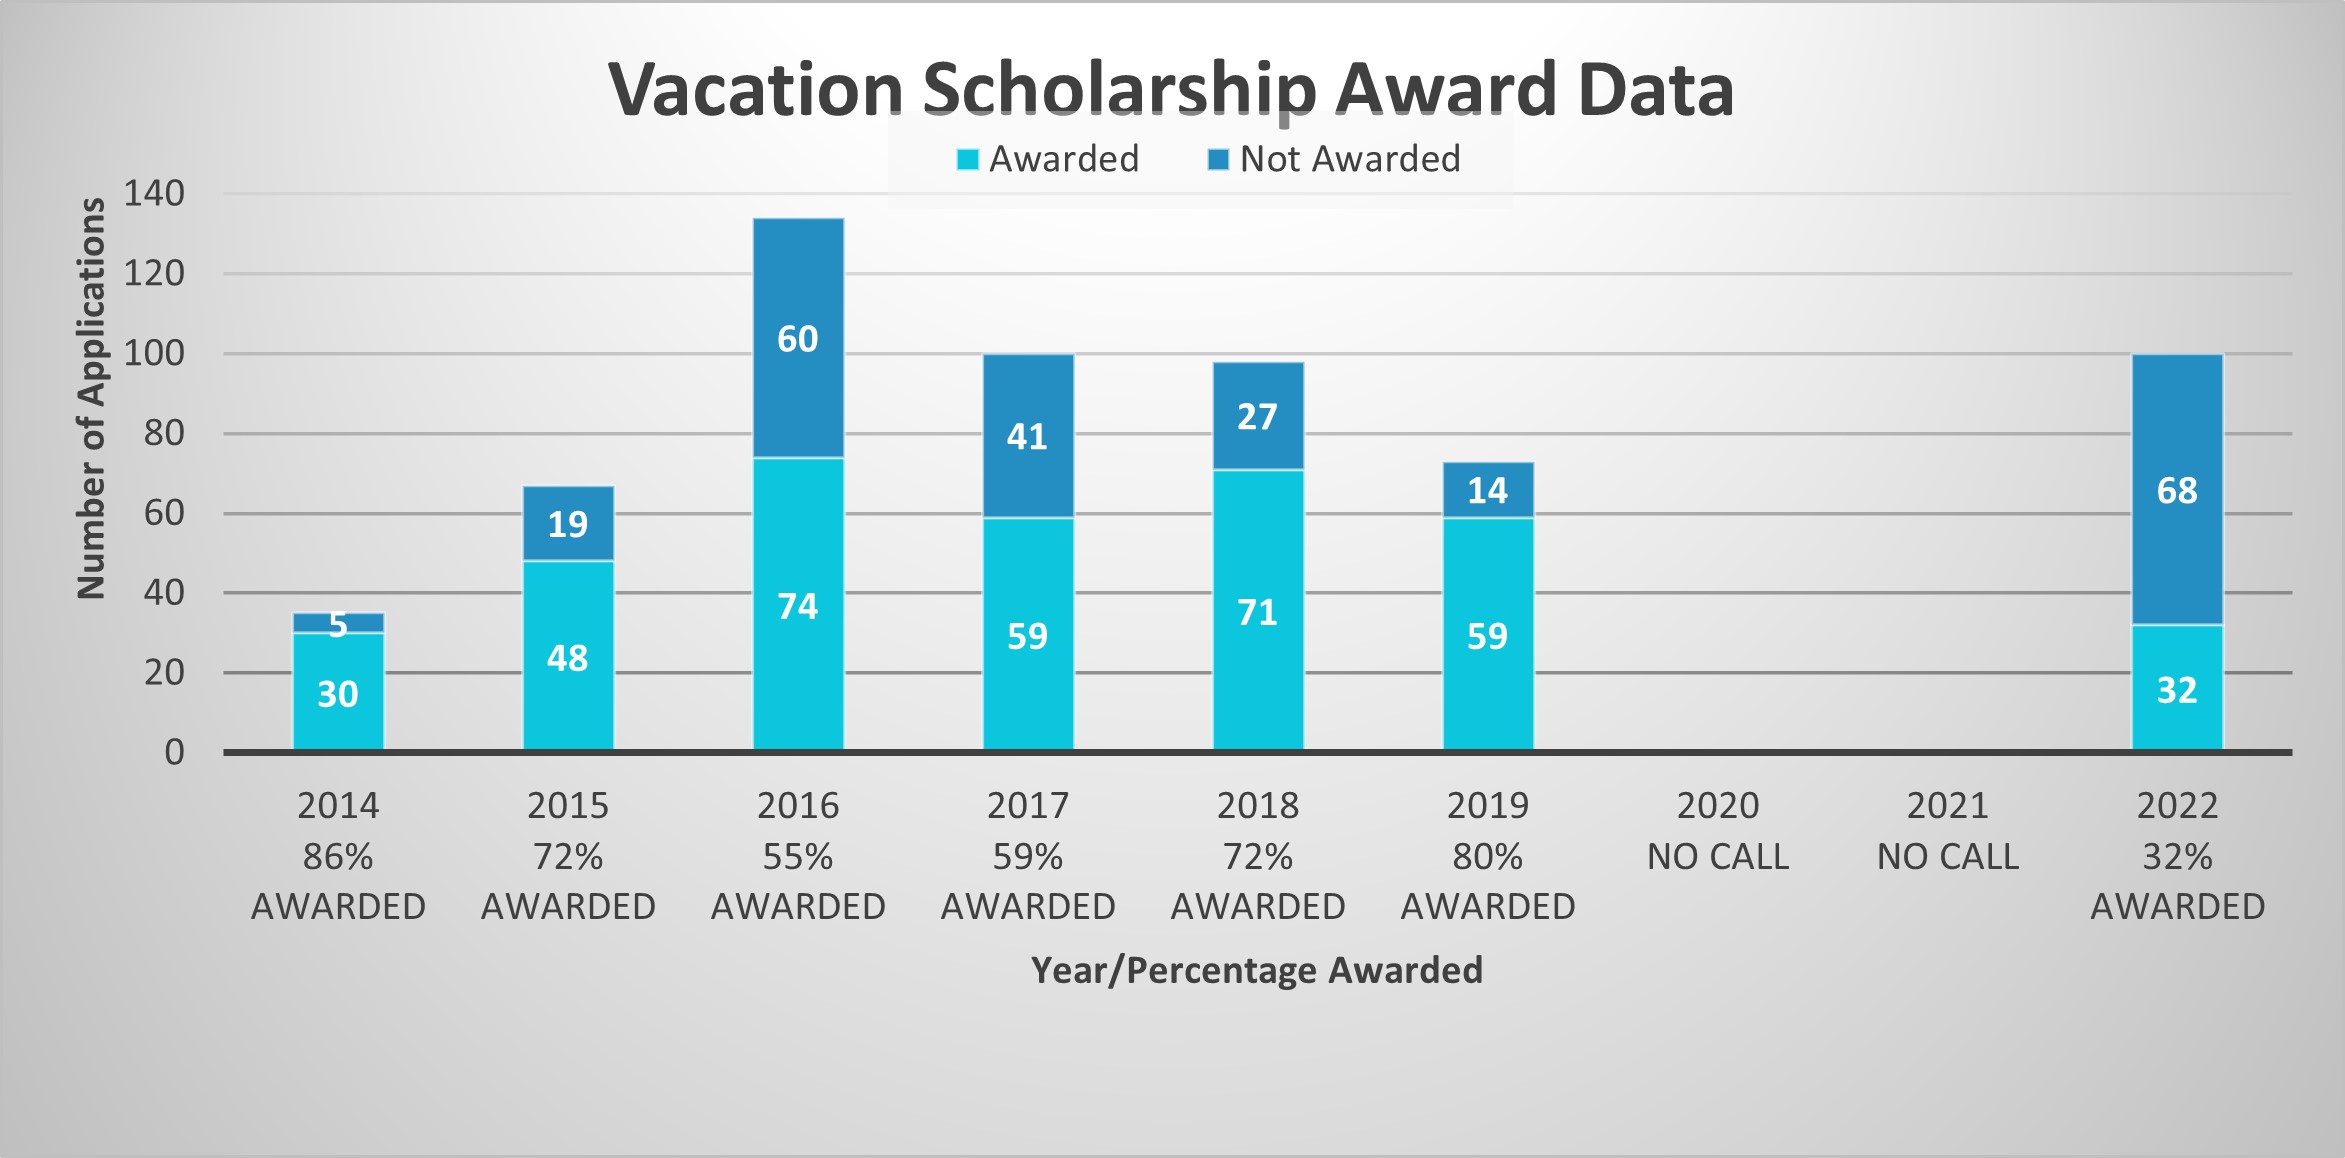 Chart showing how the application and award rates varied from 2014 to 2022